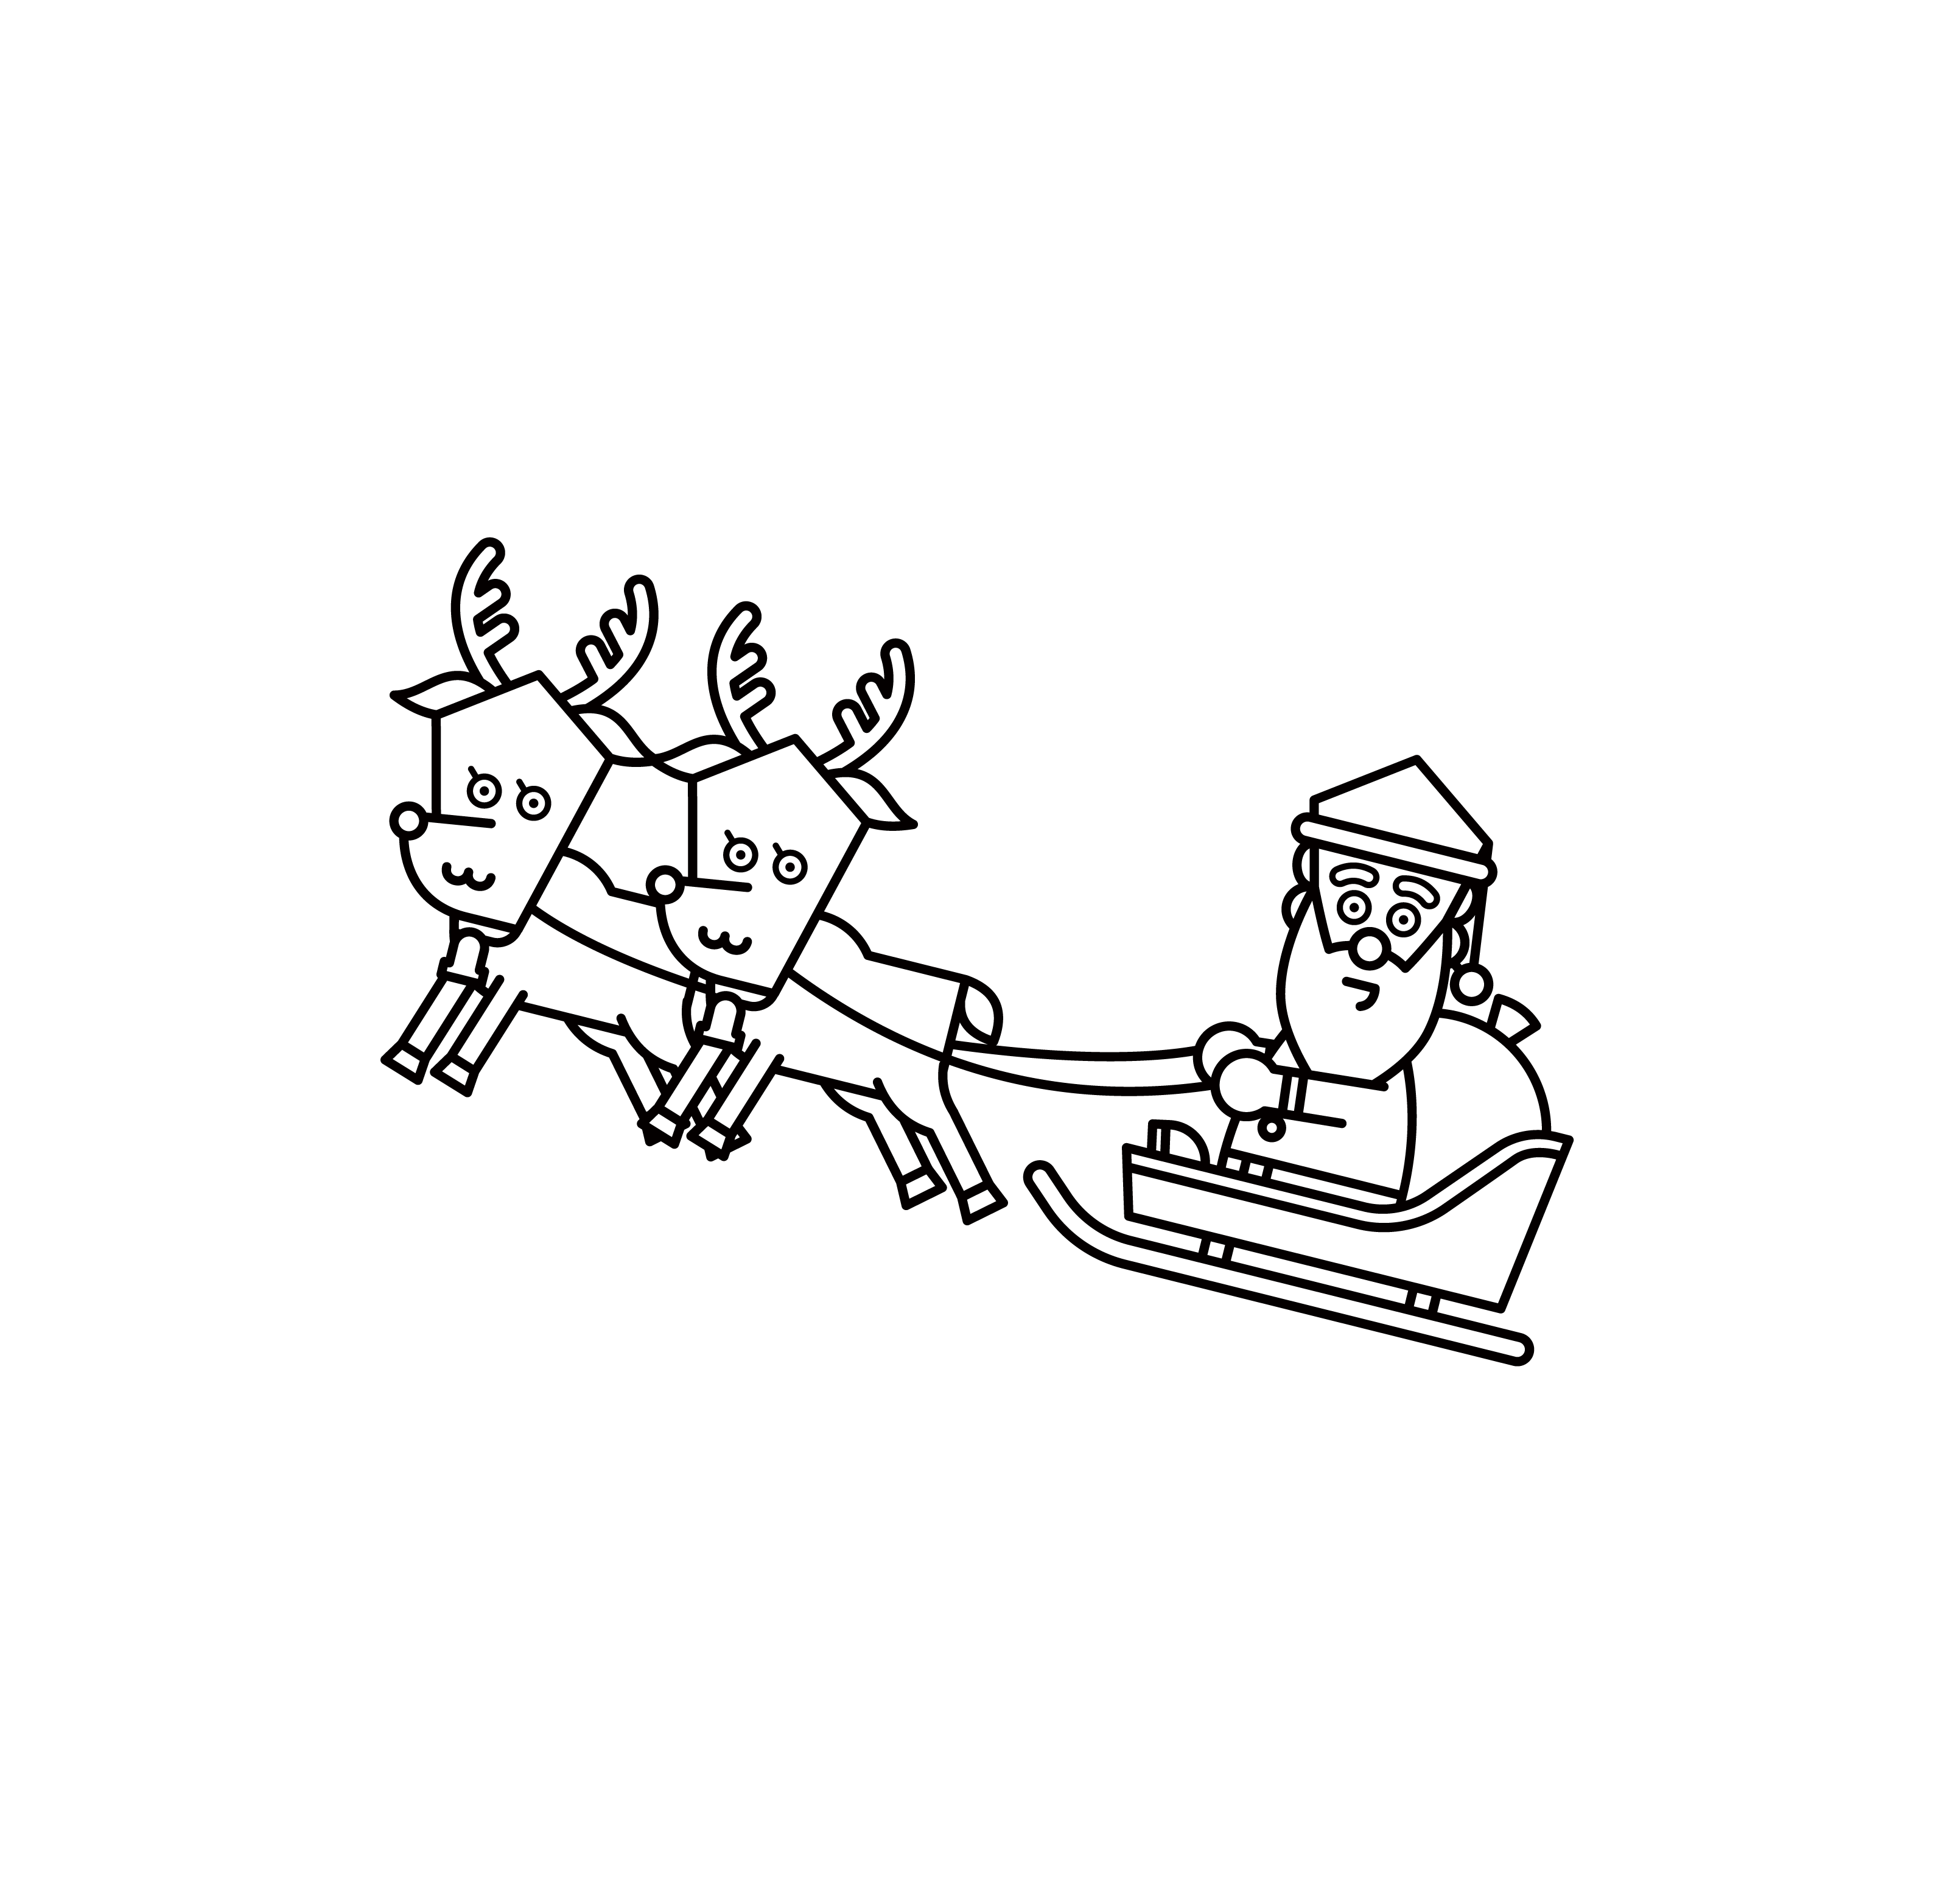 Illustration of Santa Claus running in front of the moon with a sleigh